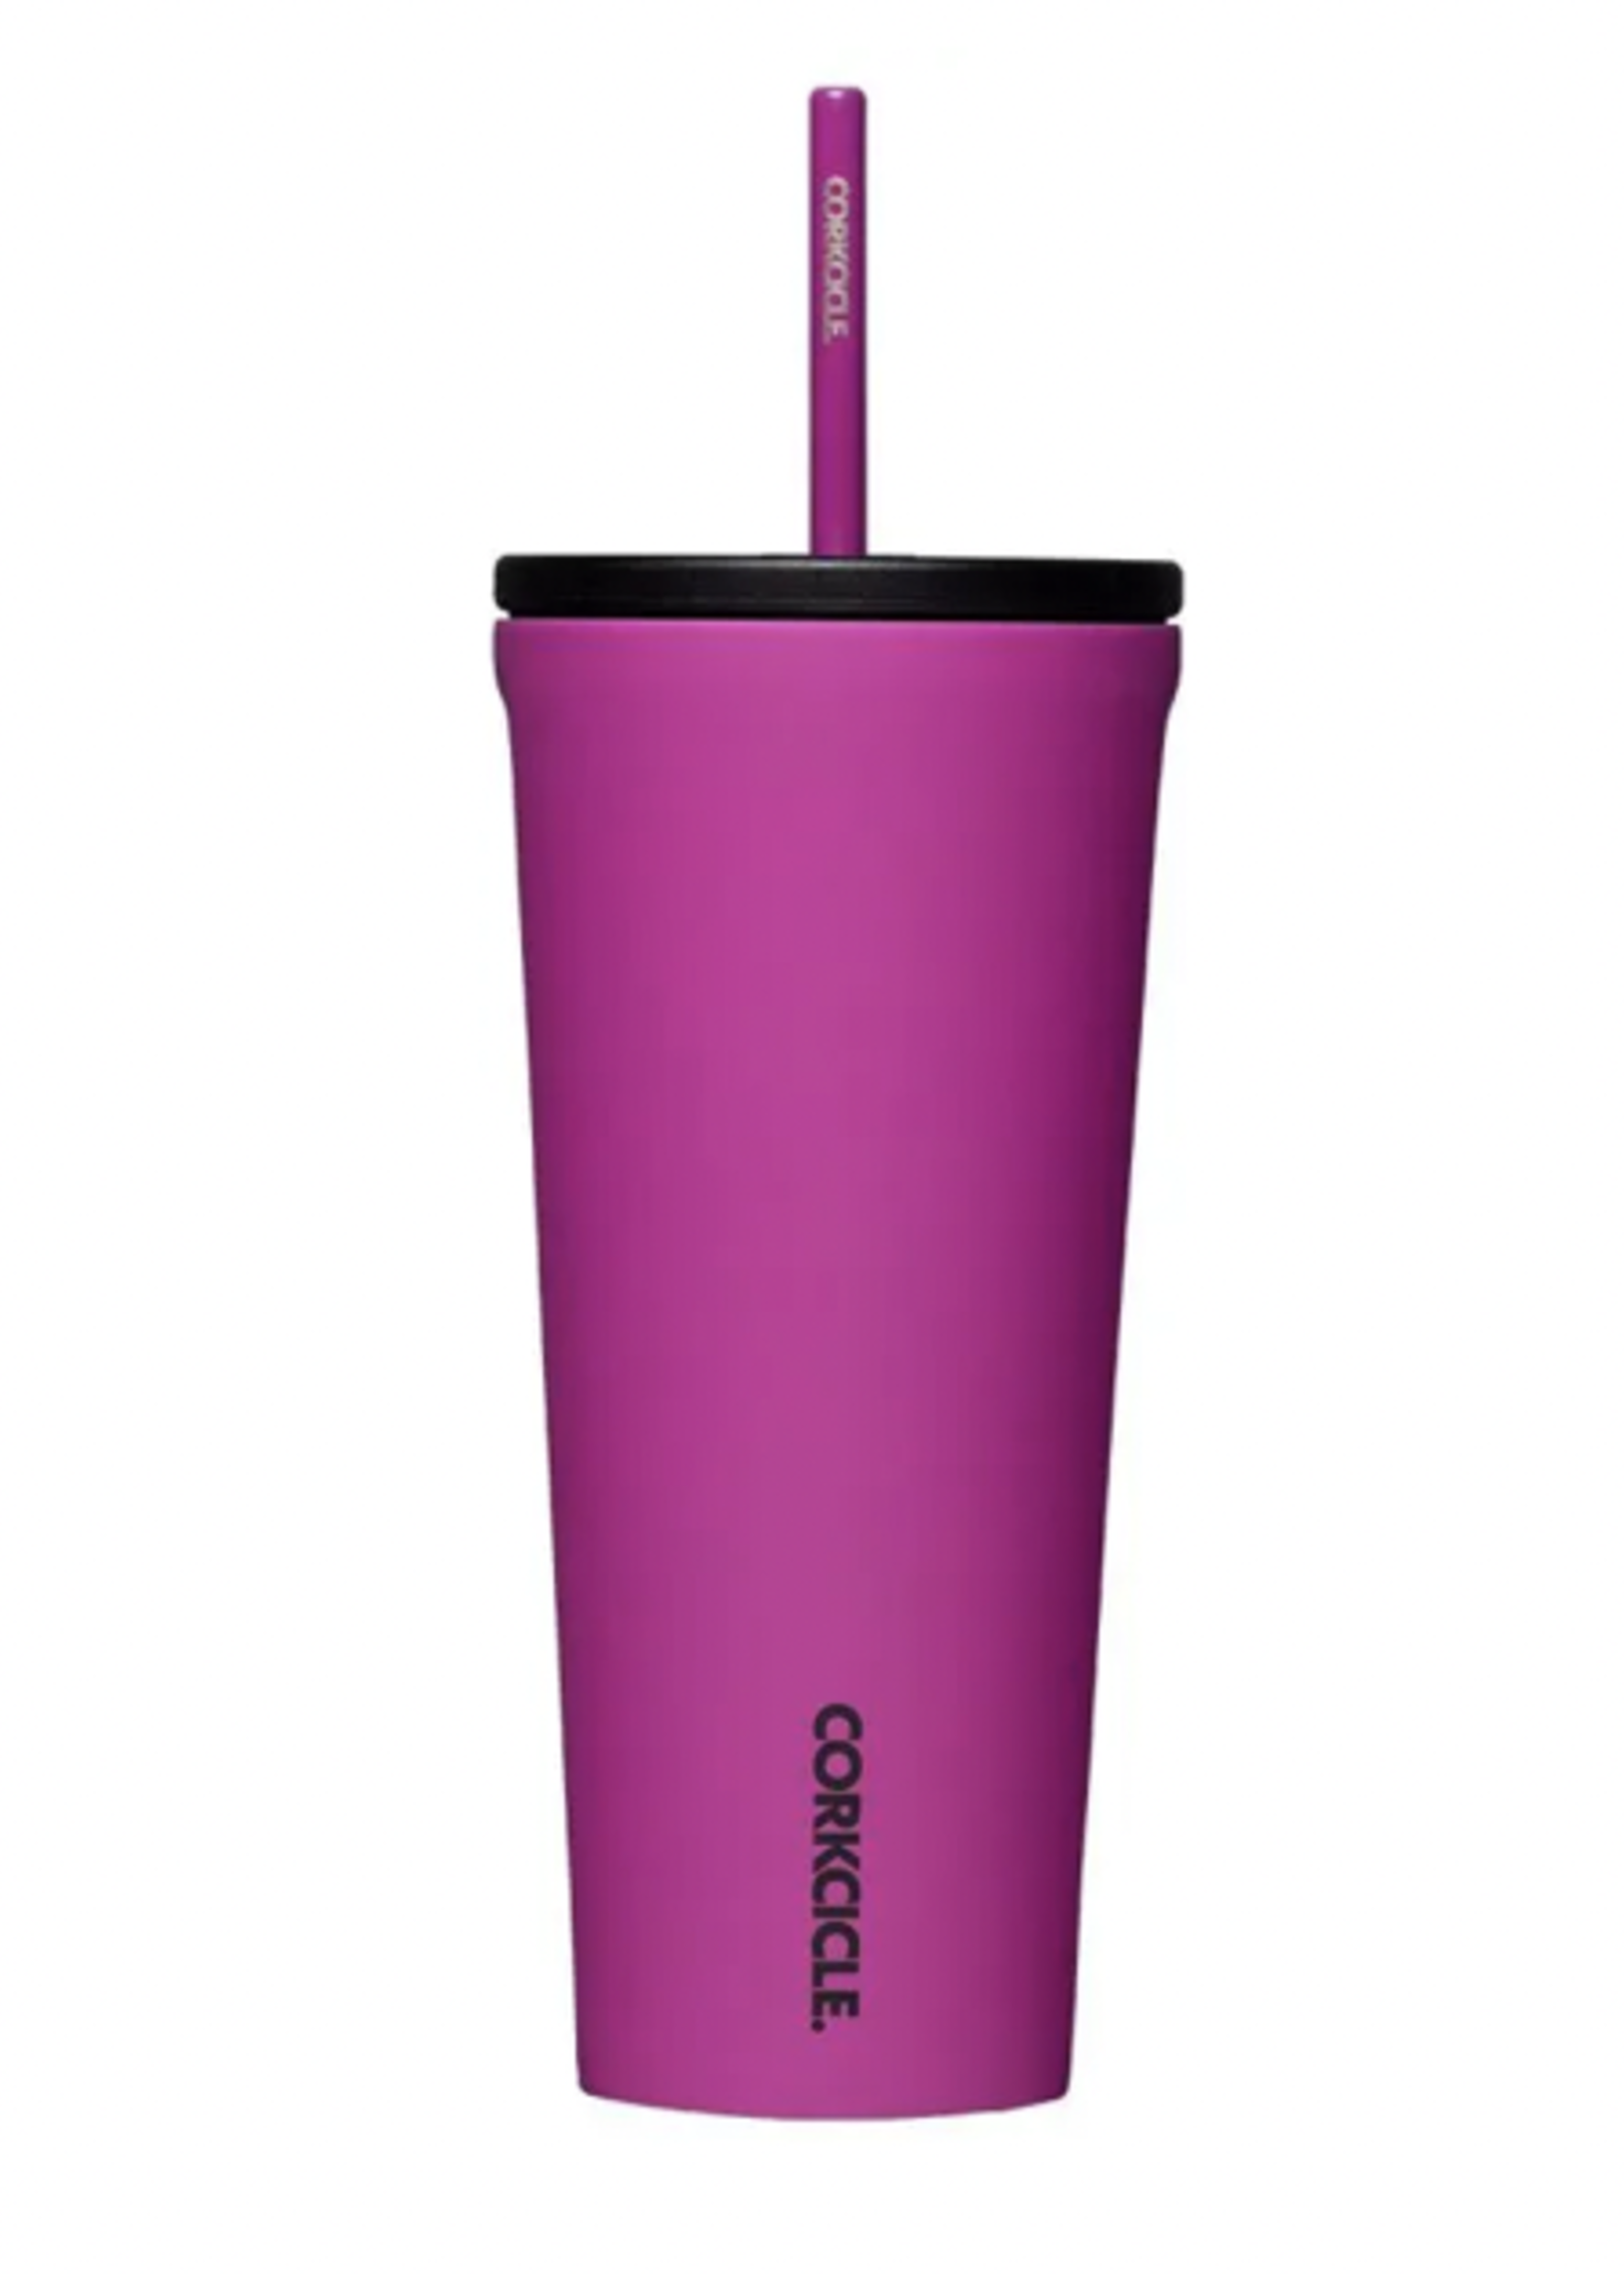 Corkcicle Cold Cup - Berry Punch